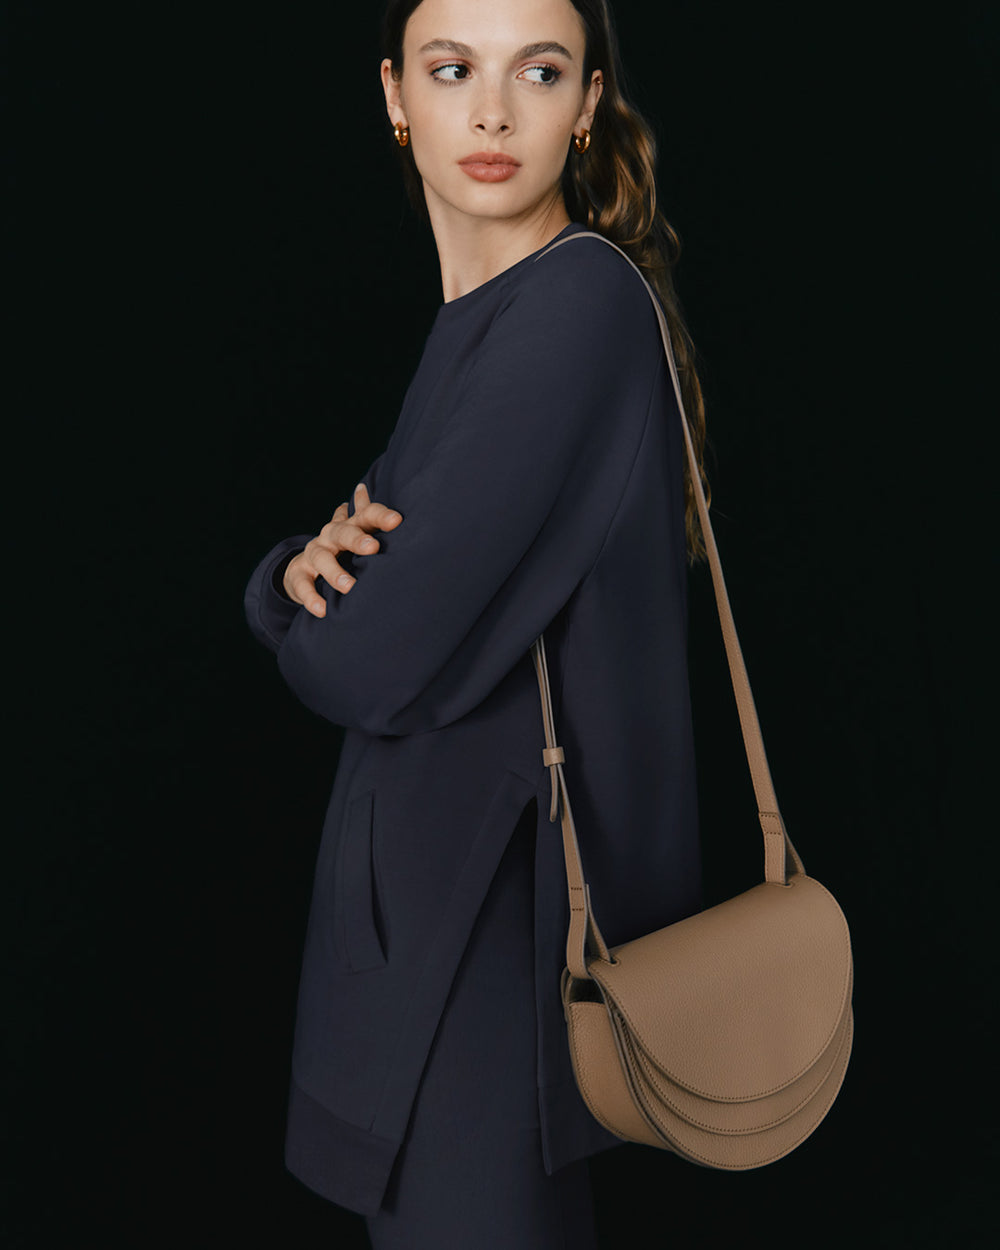 Woman standing with a shoulder bag, arms crossed.